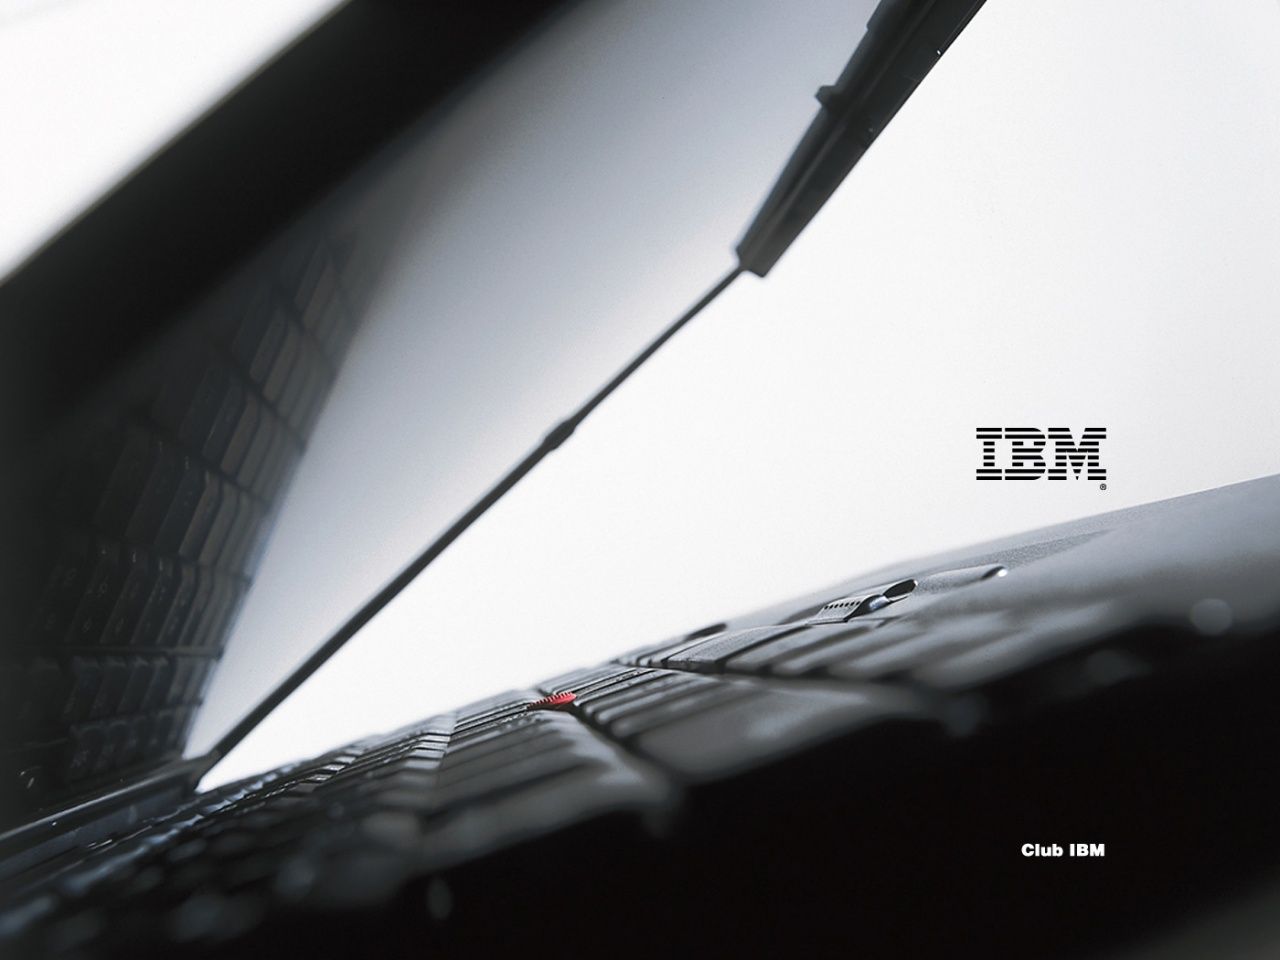 Club ibm notebook wallpapers 11551 1280x960